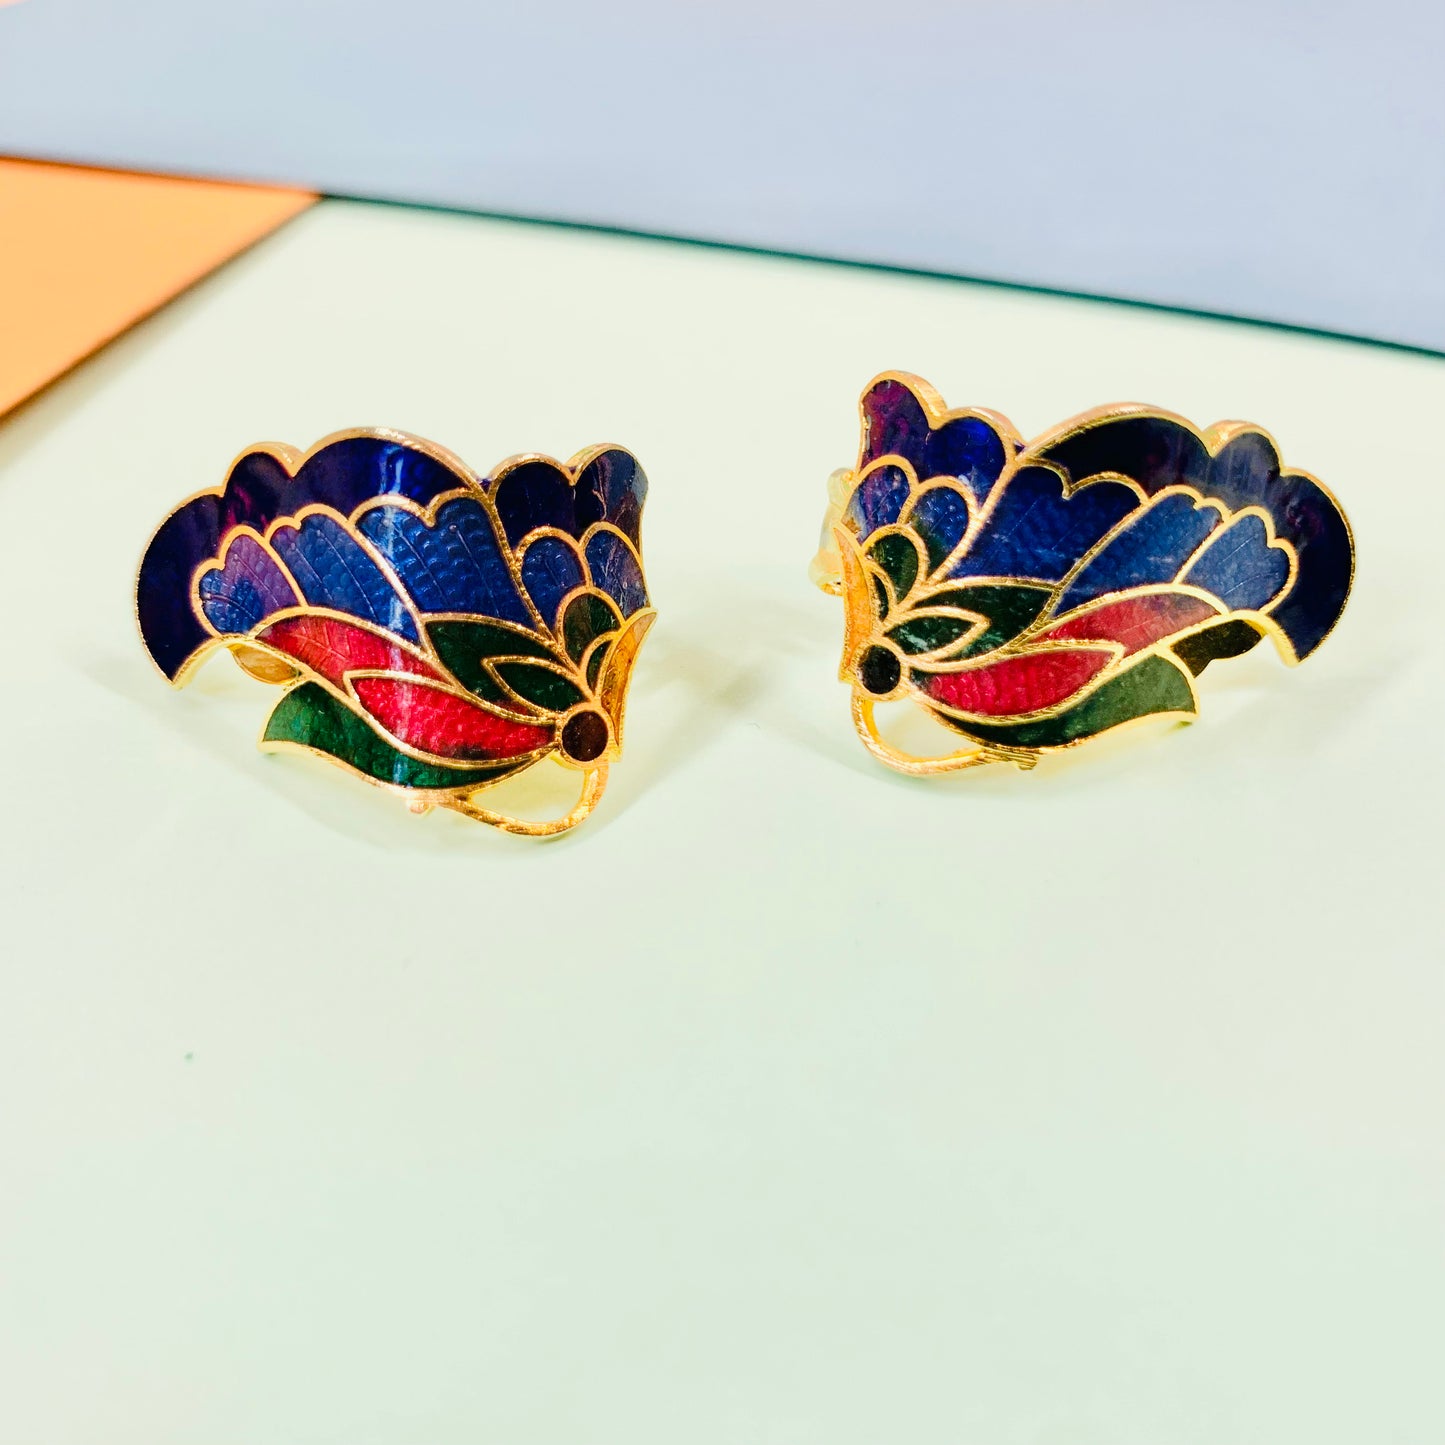 Extremely rare 1960s Italian triple gold plated butterfly cloisonne clip on earrings